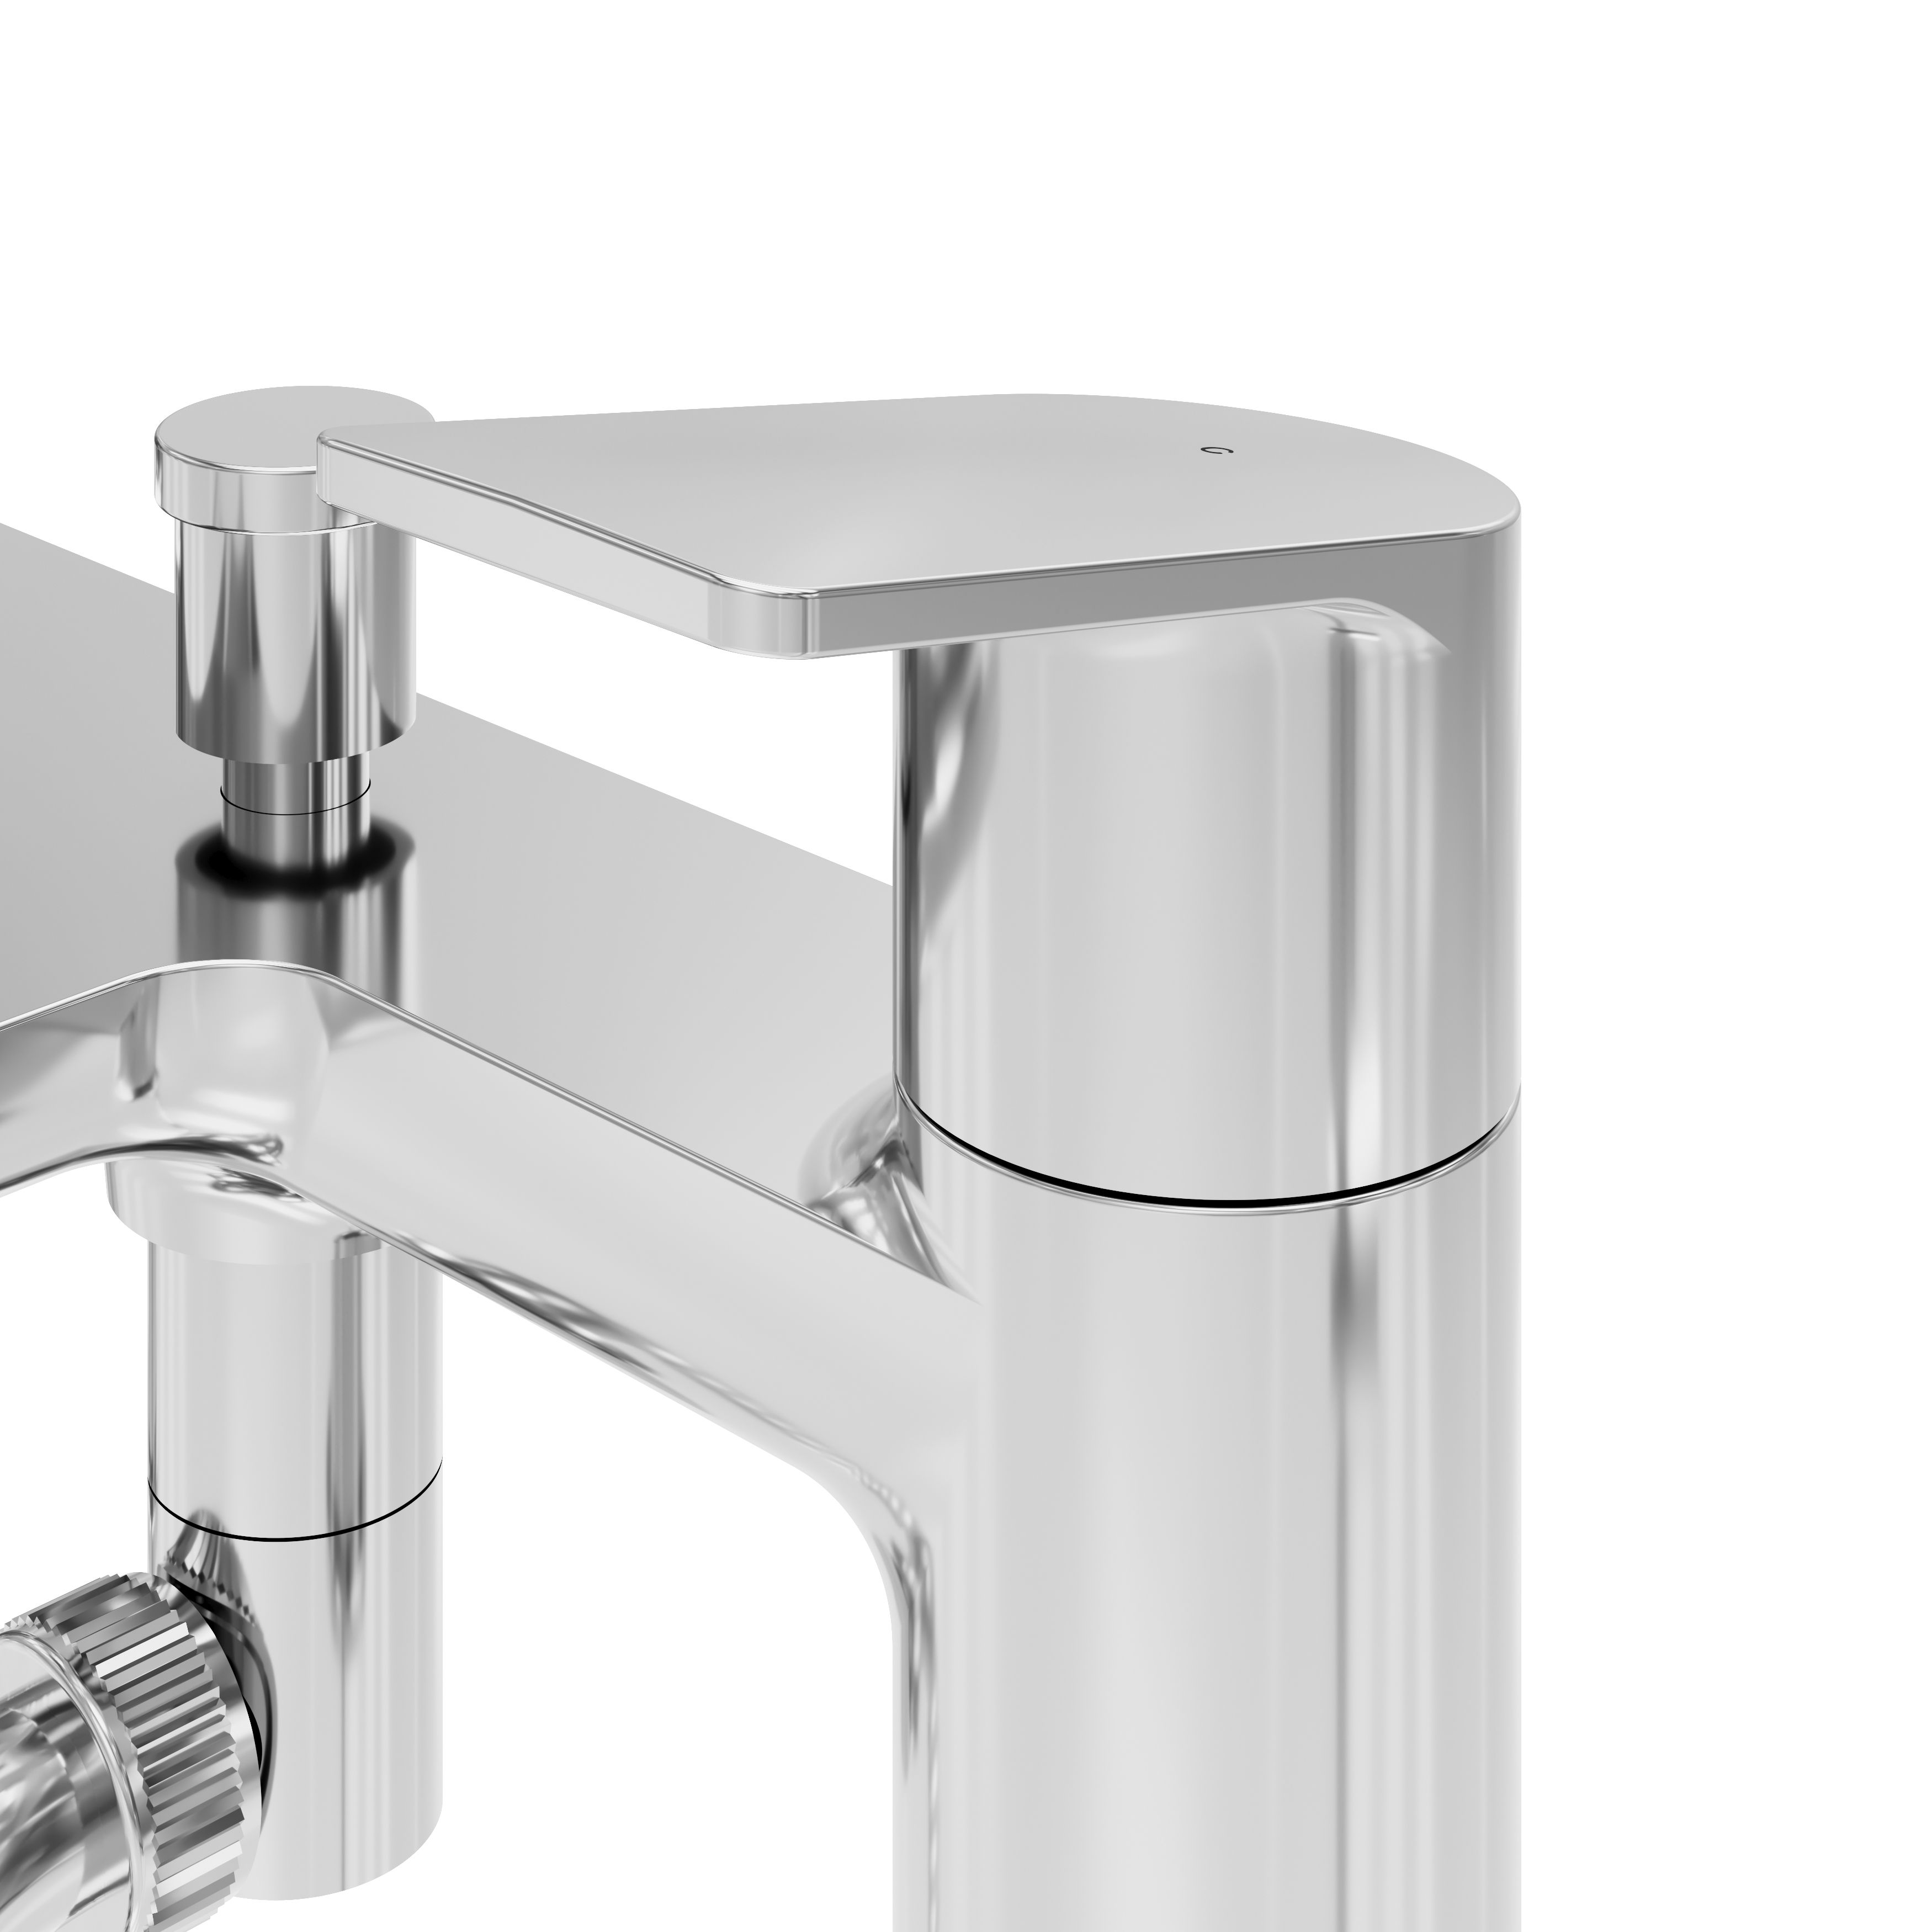 GoodHome Ajeeta Gloss Chrome effect Ceramic Deck-mounted Double Bath shower mixer tap with shower kit